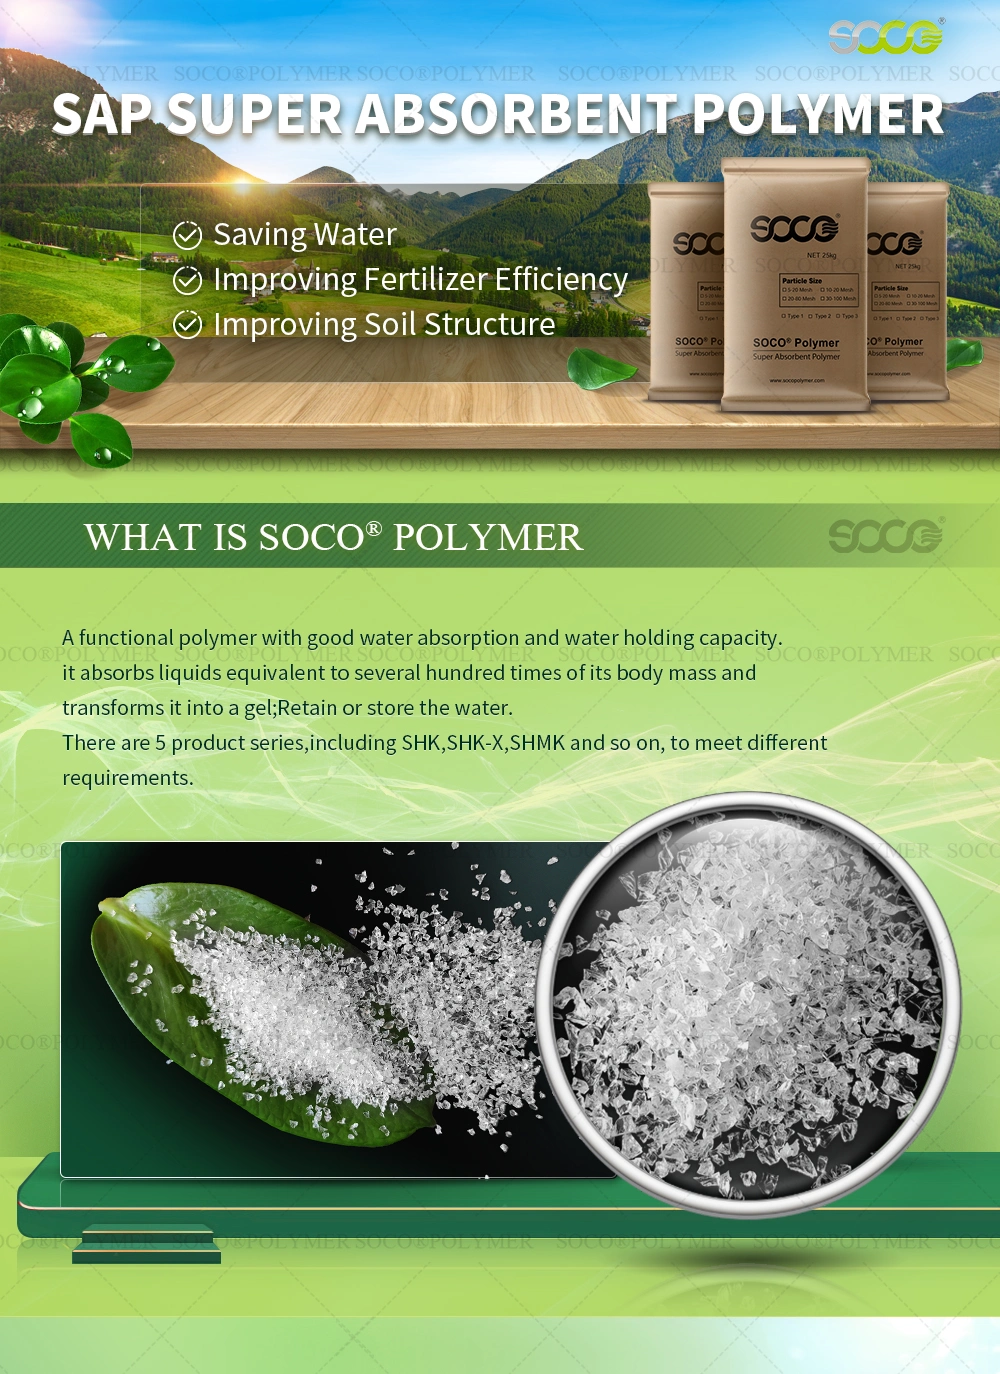 2020 Soco Super Absorbent Polymer for Planting Cherries and Blueberries Potassium Polyacrylate